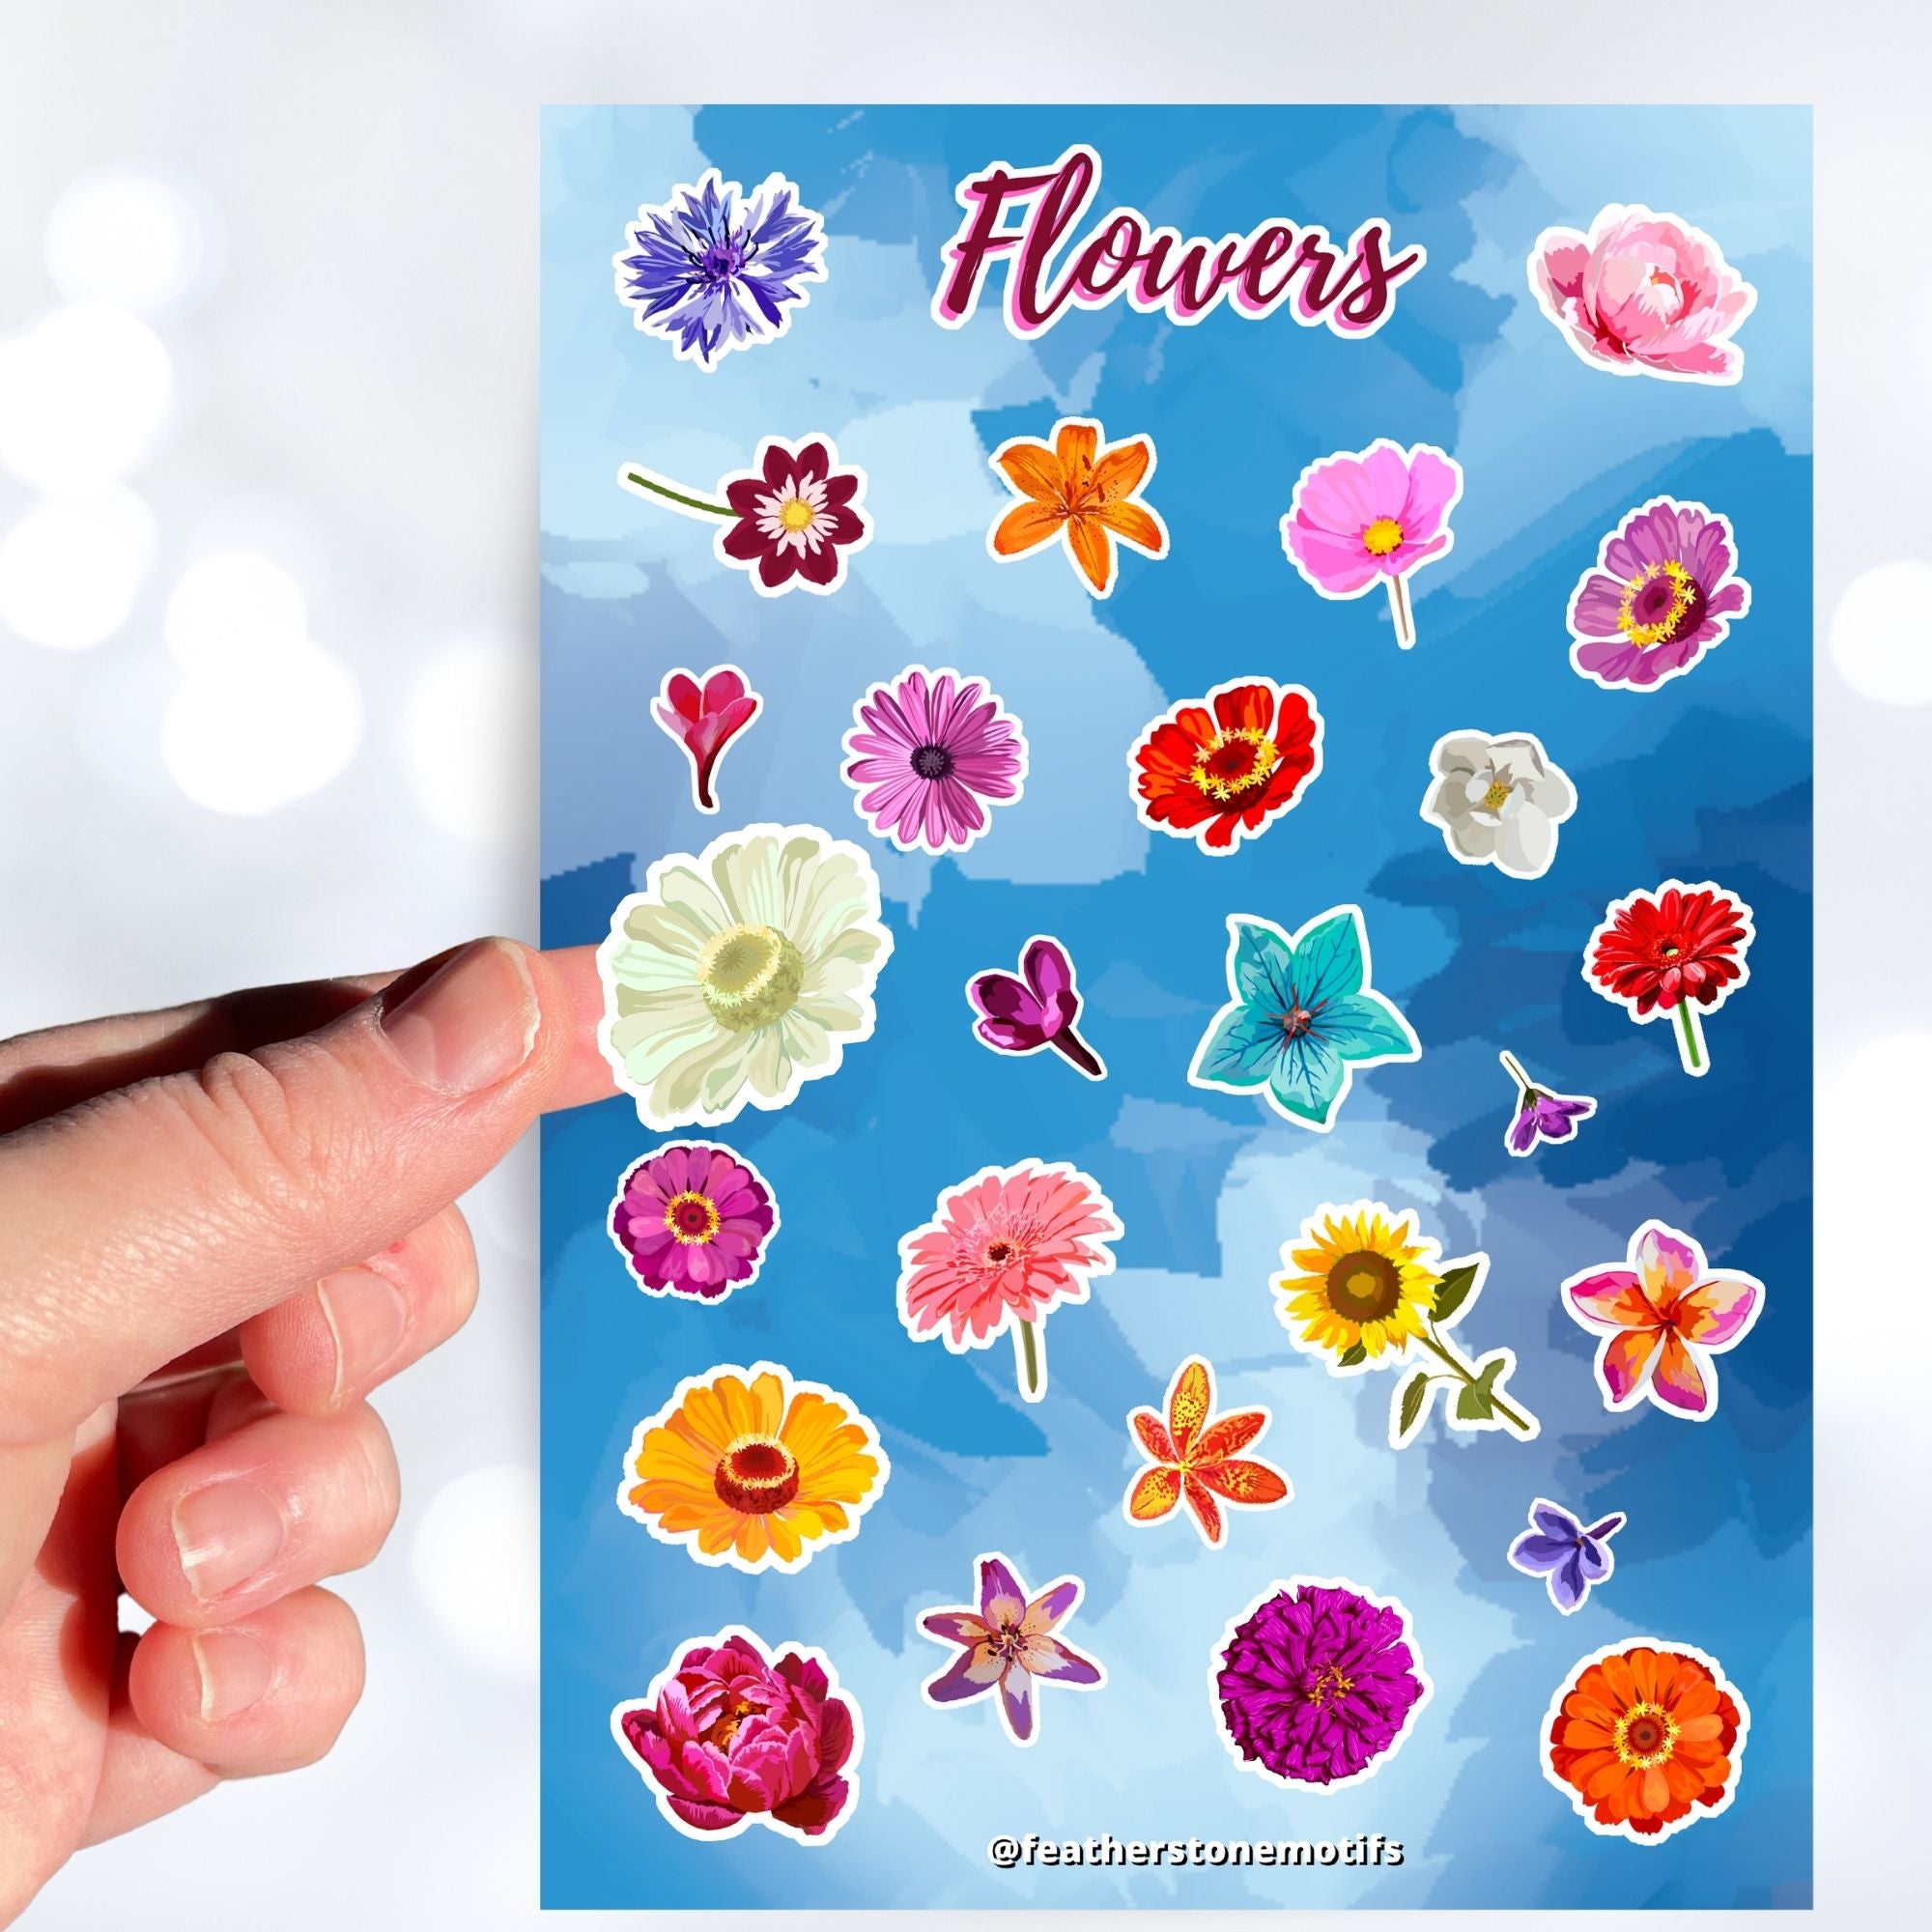 So many flowers! This sticker sheet is filled with images of all your favorite flowers. This image shows a hand holding a white flower above the sticker sheet.